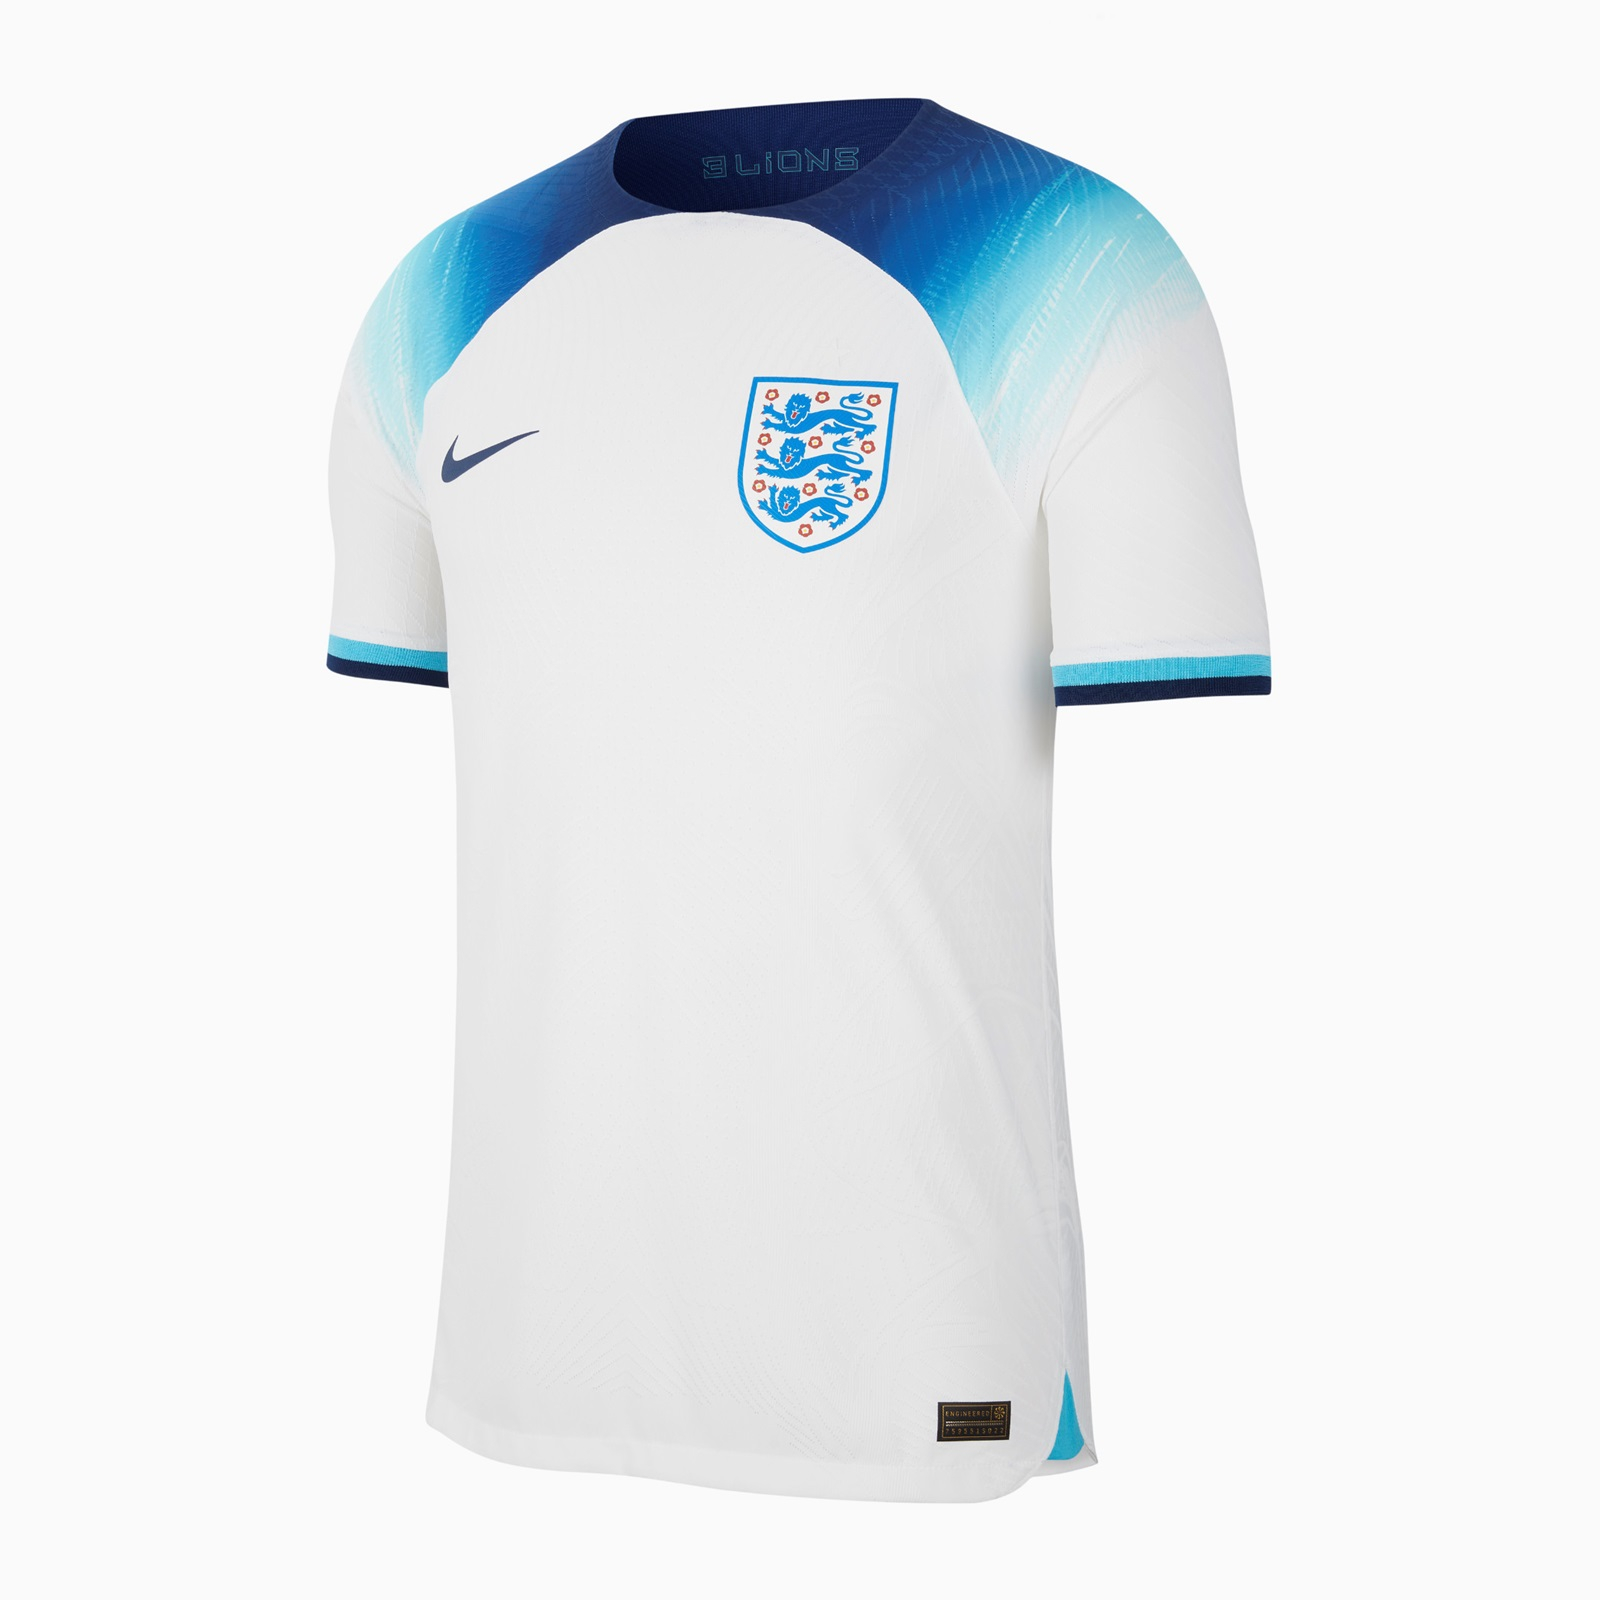 England FIFA World Cup Jersey 2022 in Pakistan The Shoppies